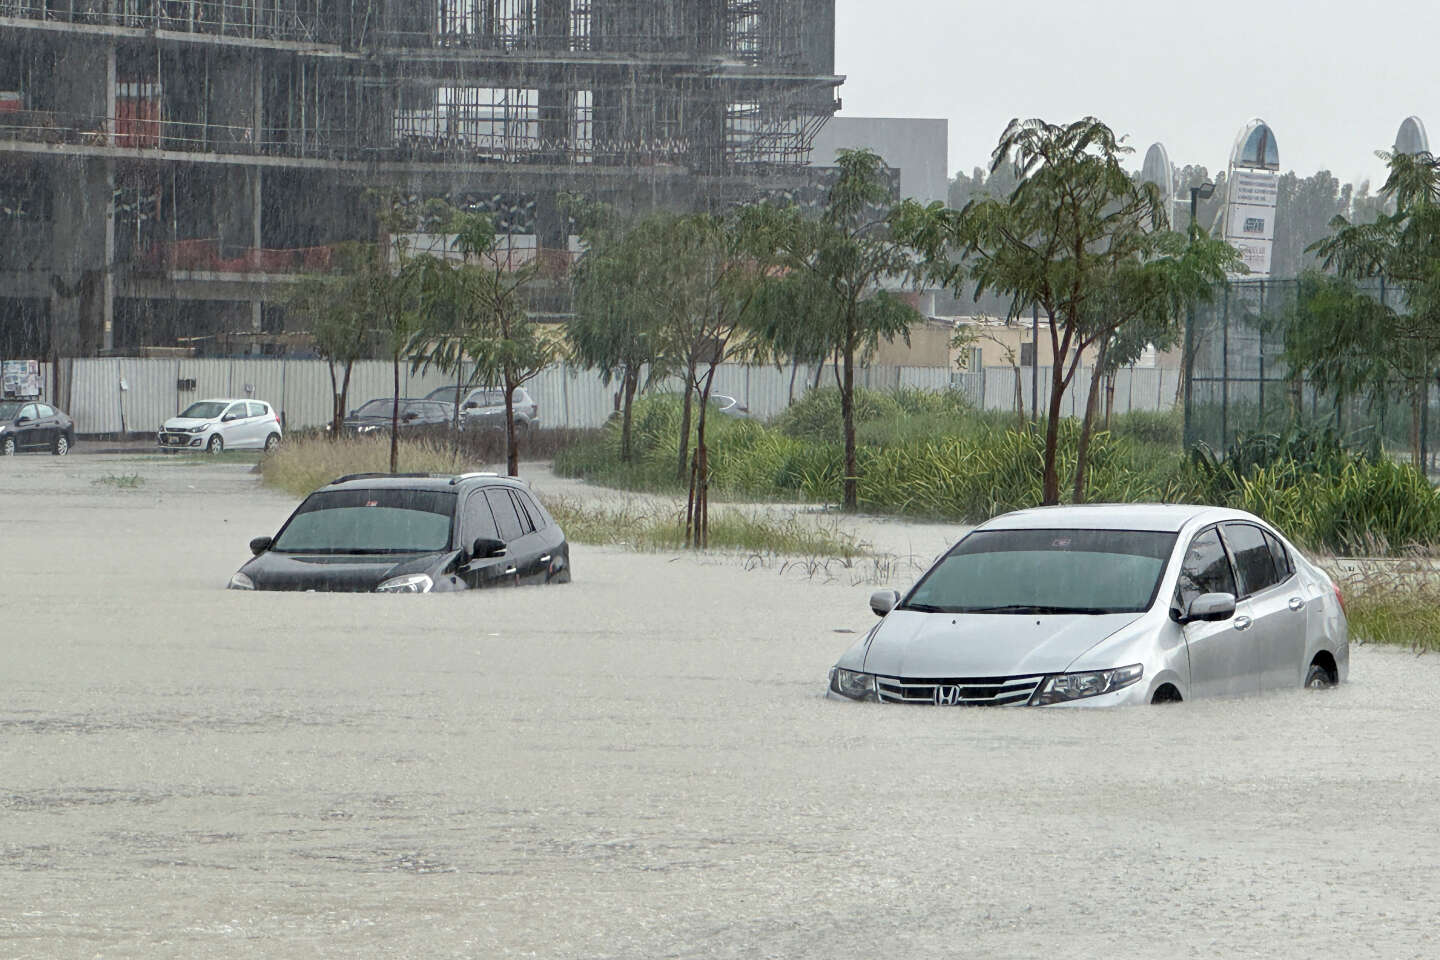 Dubai reels from atypical heavy rains and widespread flooding